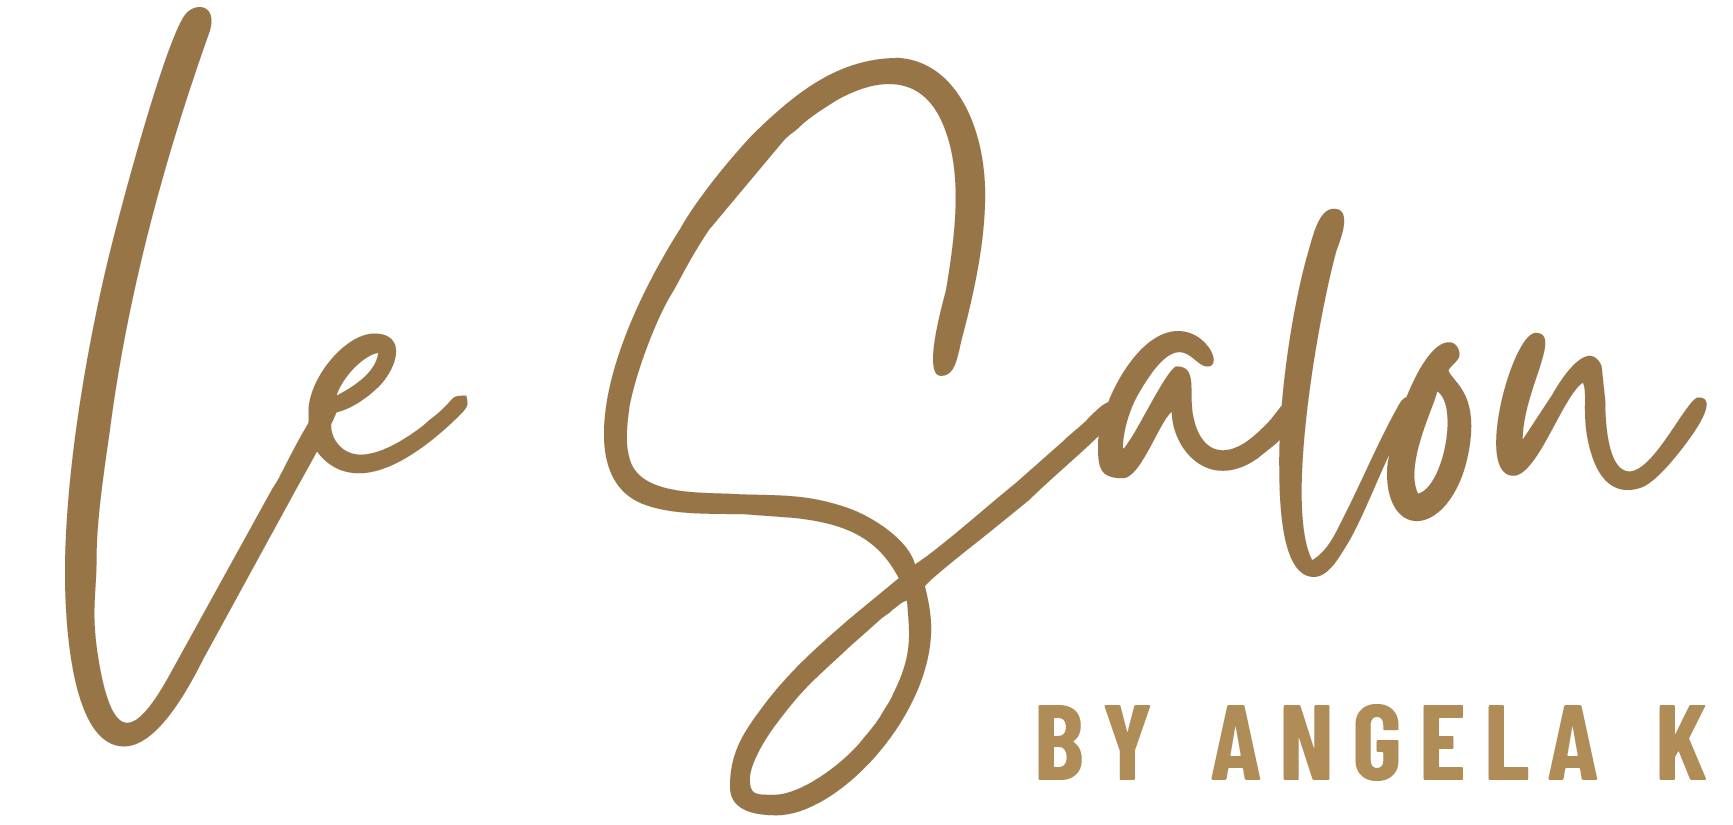 Photo of the hotel Sofitel Los Angeles at Beverly Hills: Le salon logo new logo june 2021 final png